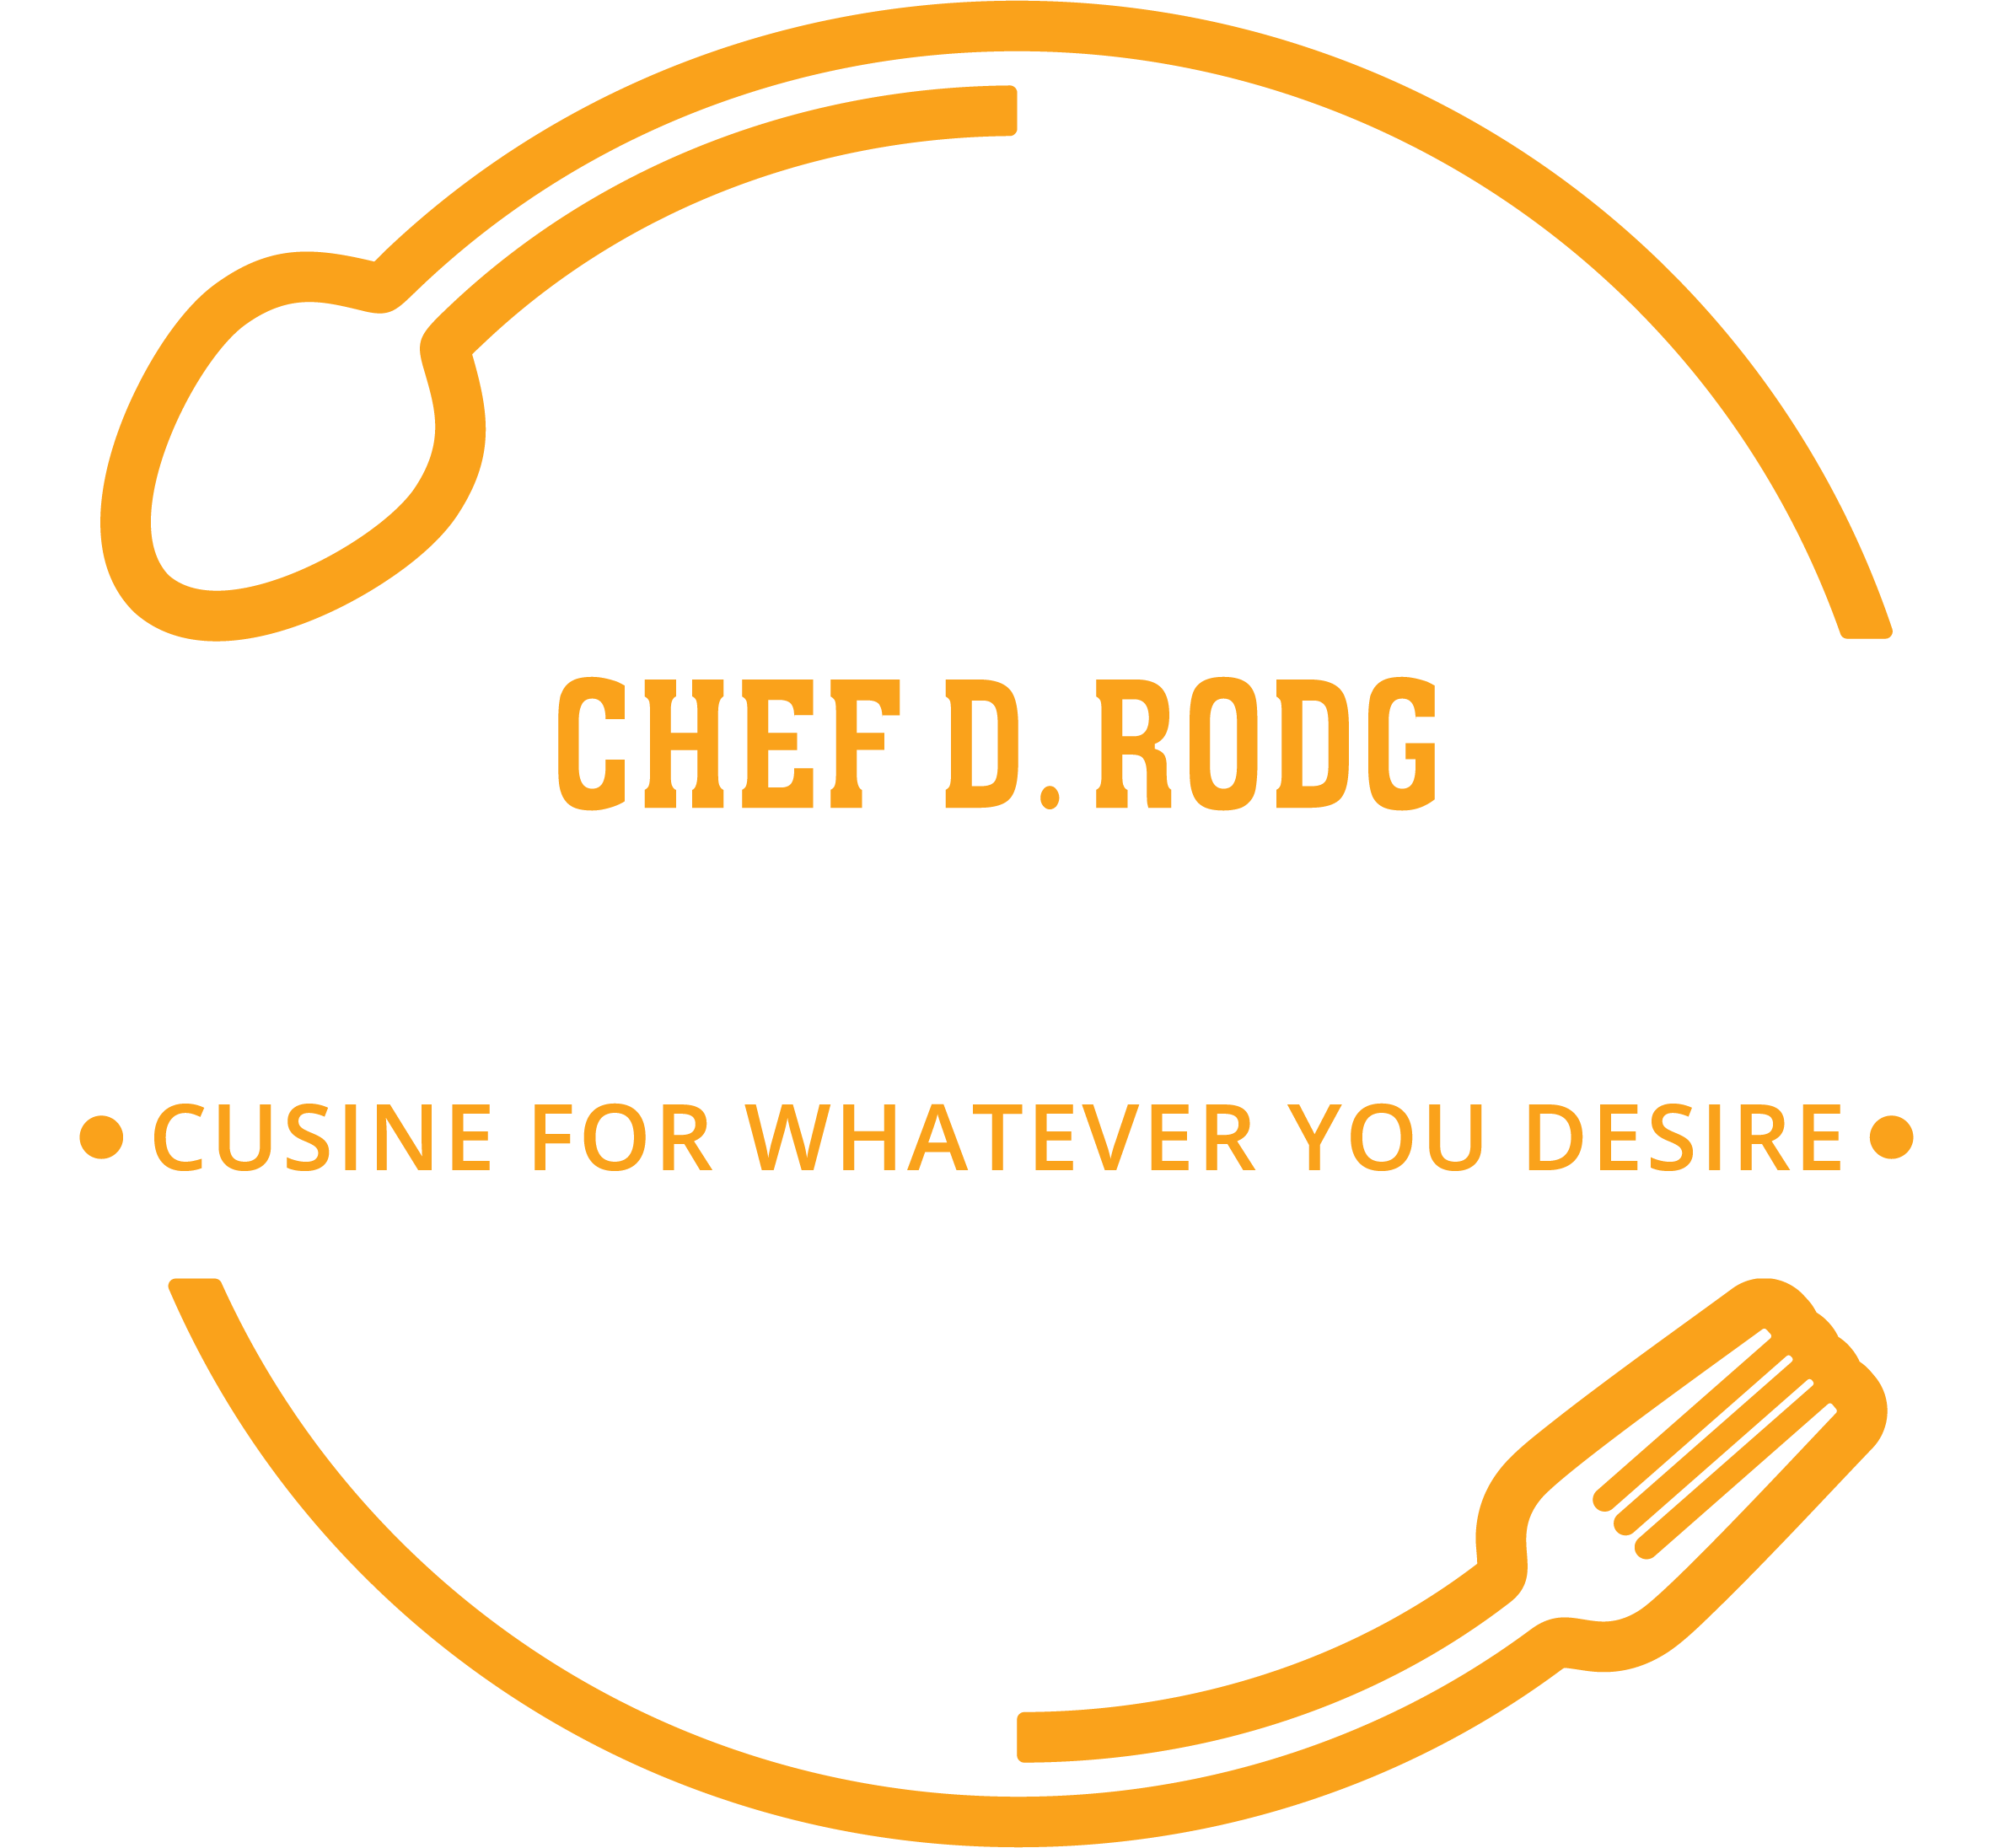 World Class Catering